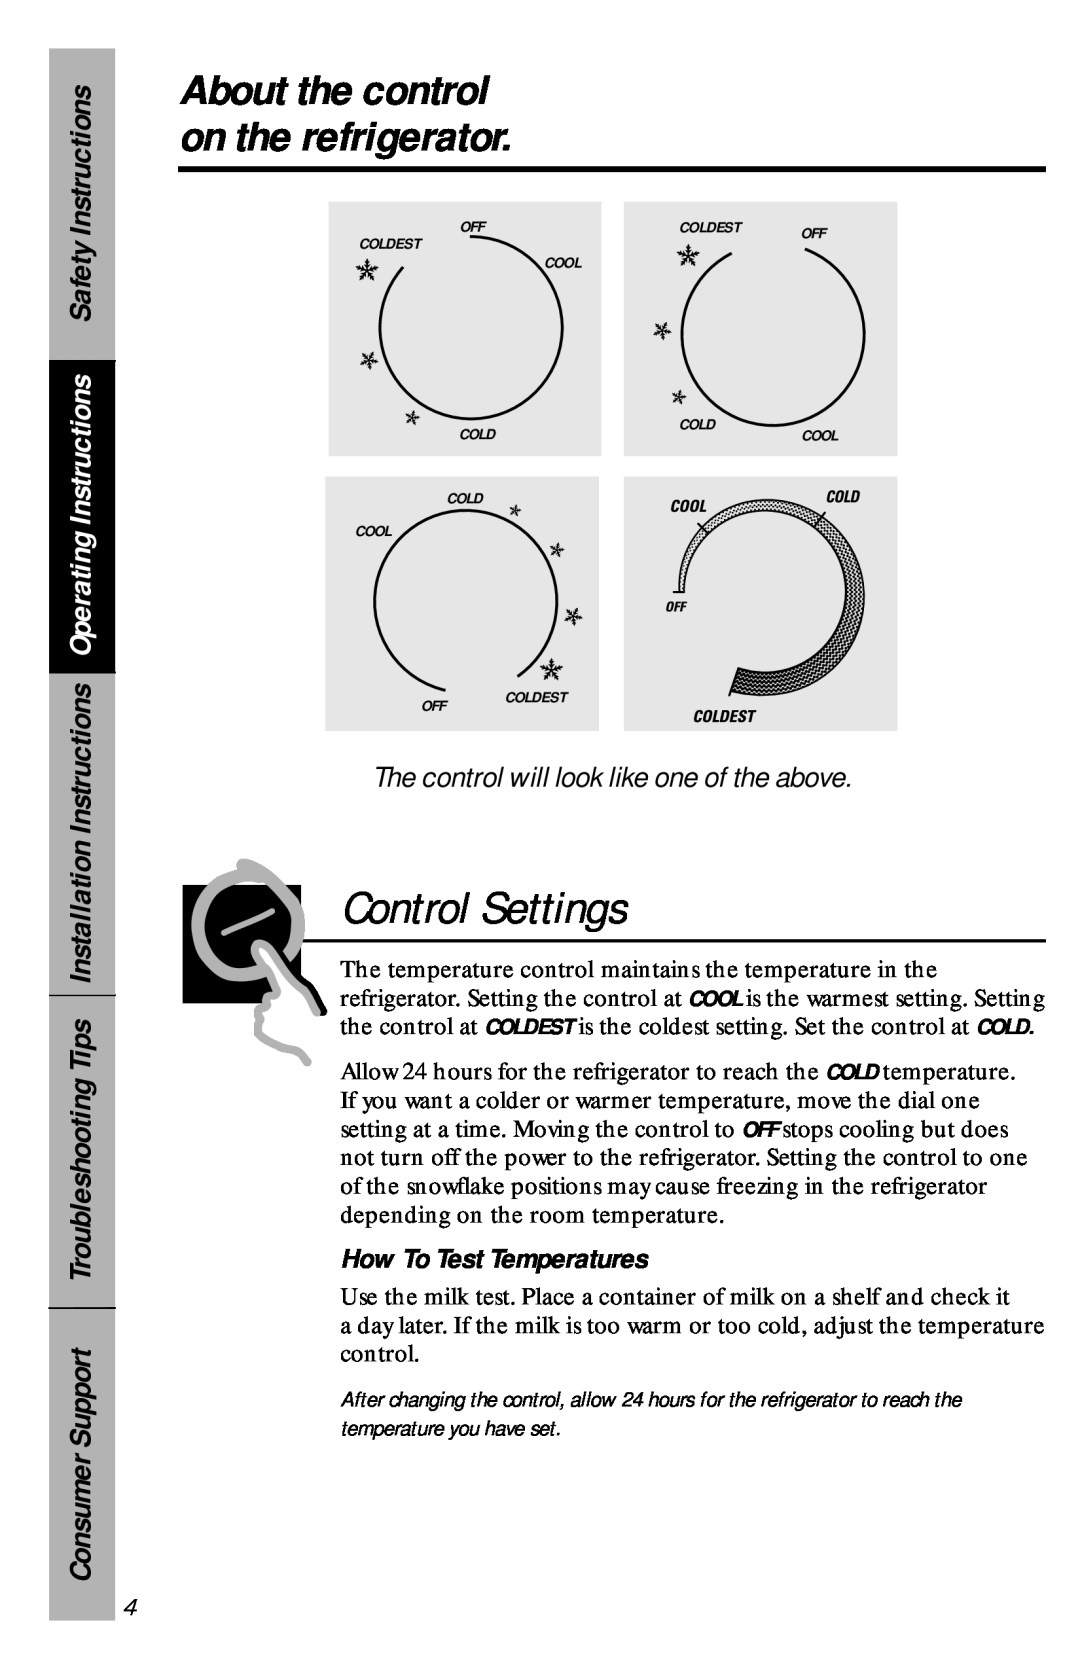 Camco 350A4502P296 Control Settings, About the control on the refrigerator, The control will look like one of the above 